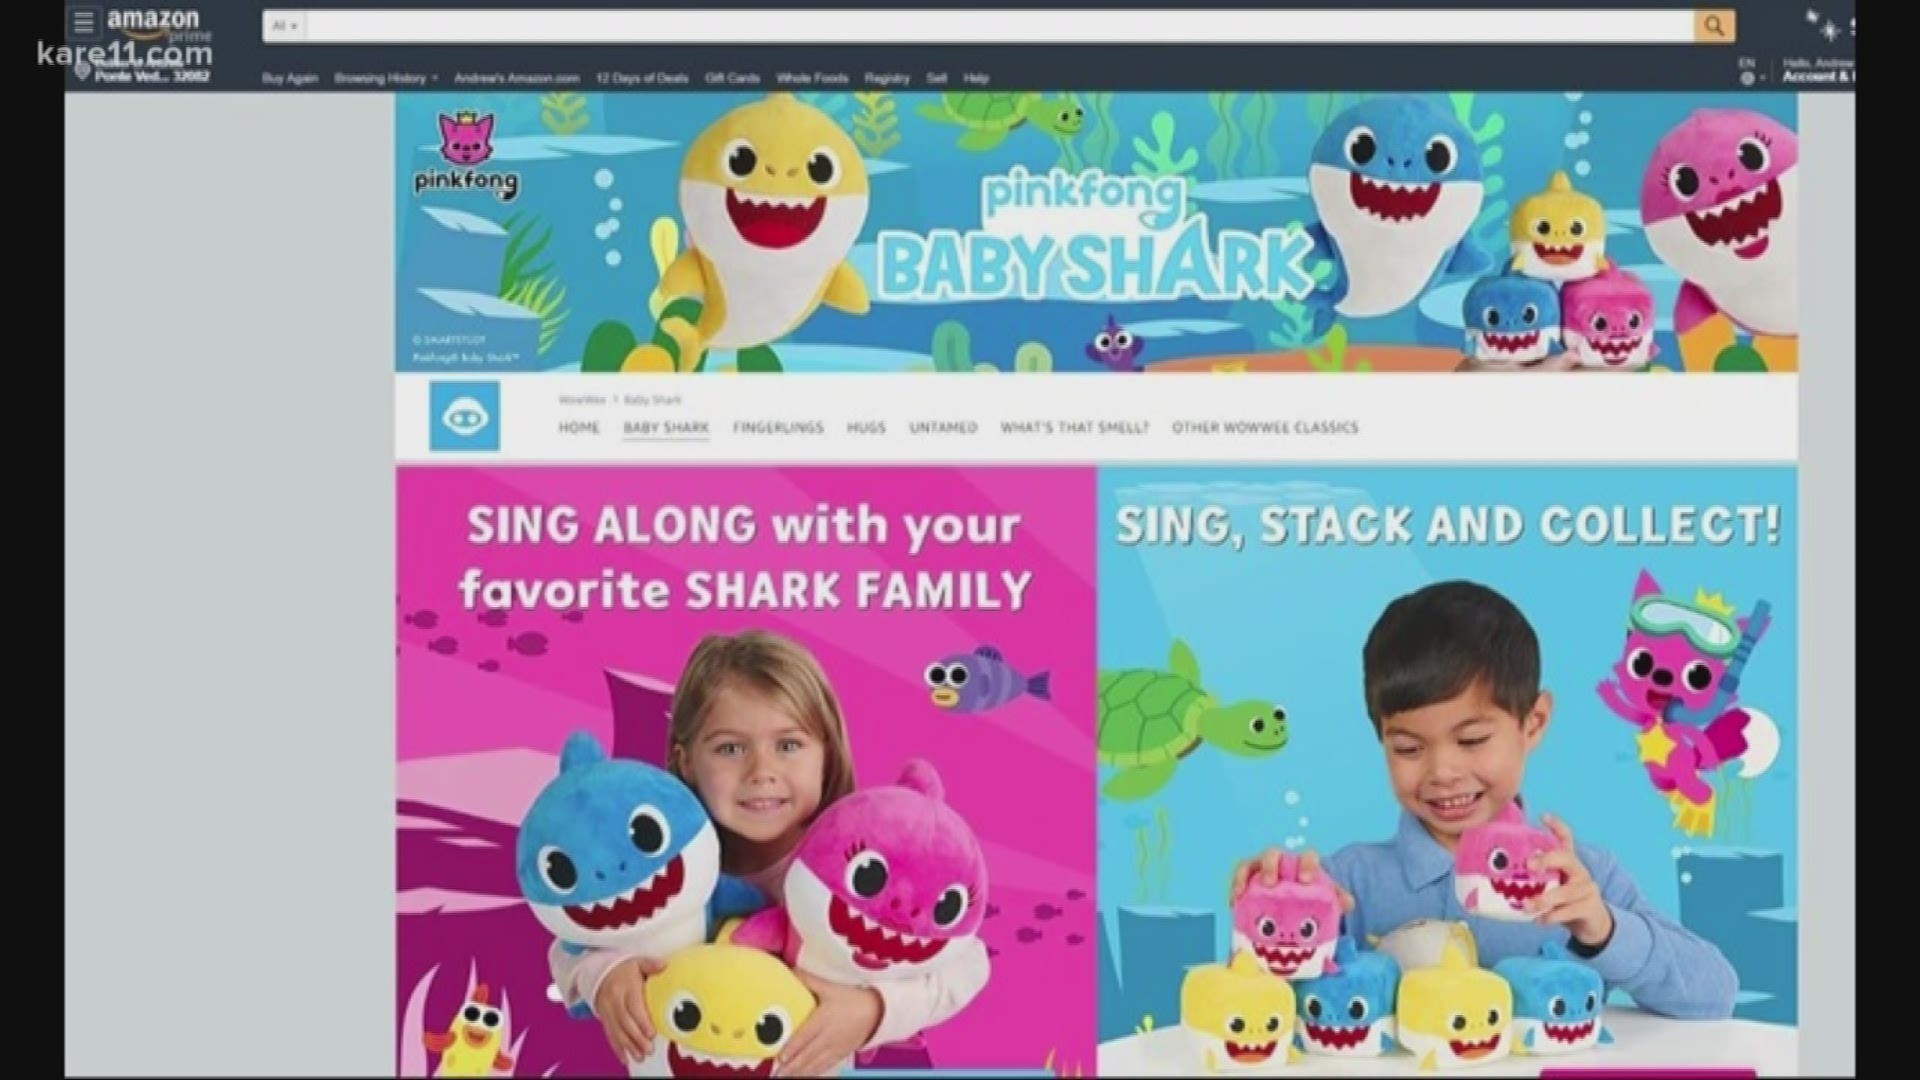 Prime Video: Pinkfong! Baby Shark Sing Along